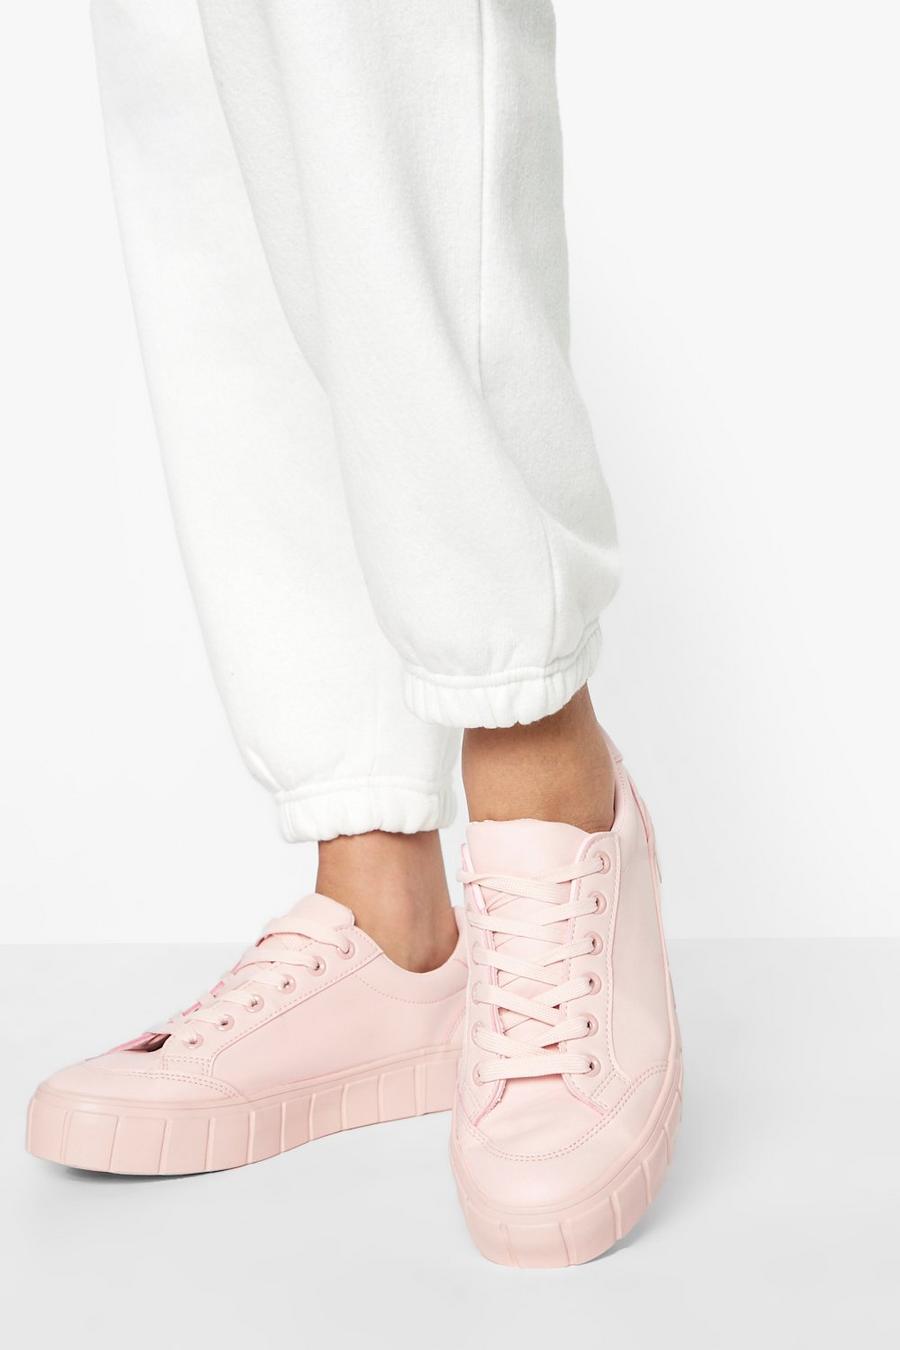 Pink rose Ribbed Sole Flat Trainer